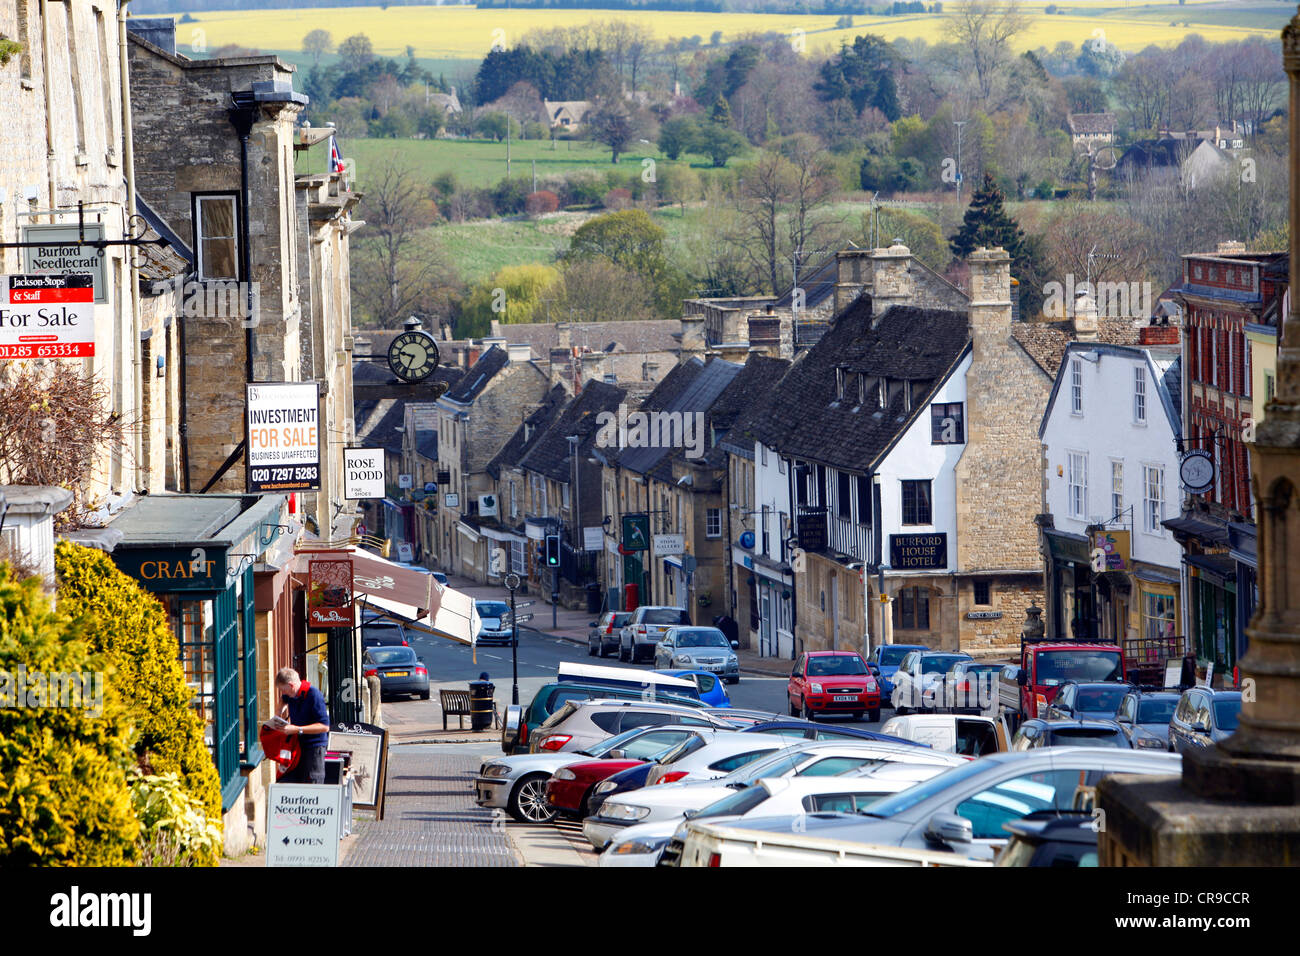 Burford, a small town on the River Windrush in the Cotswold Hills, minted by ancient stone houses. Burford, Oxfordshire, UK, Stock Photo